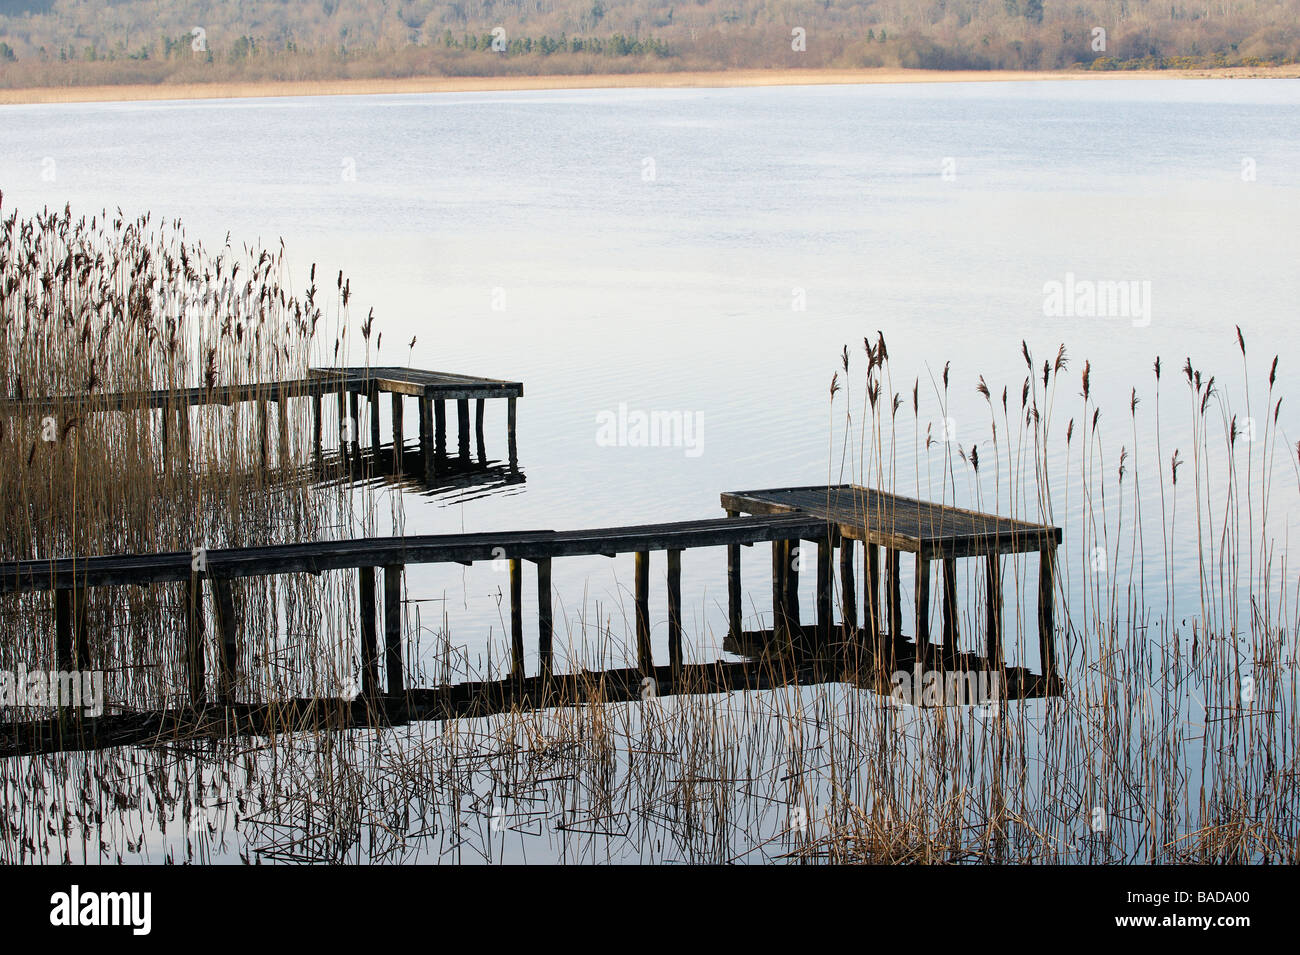 Fishing pontoon surrounded by Reeds at the edge of a lake County Fermanagh Northern Ireland Stock Photo